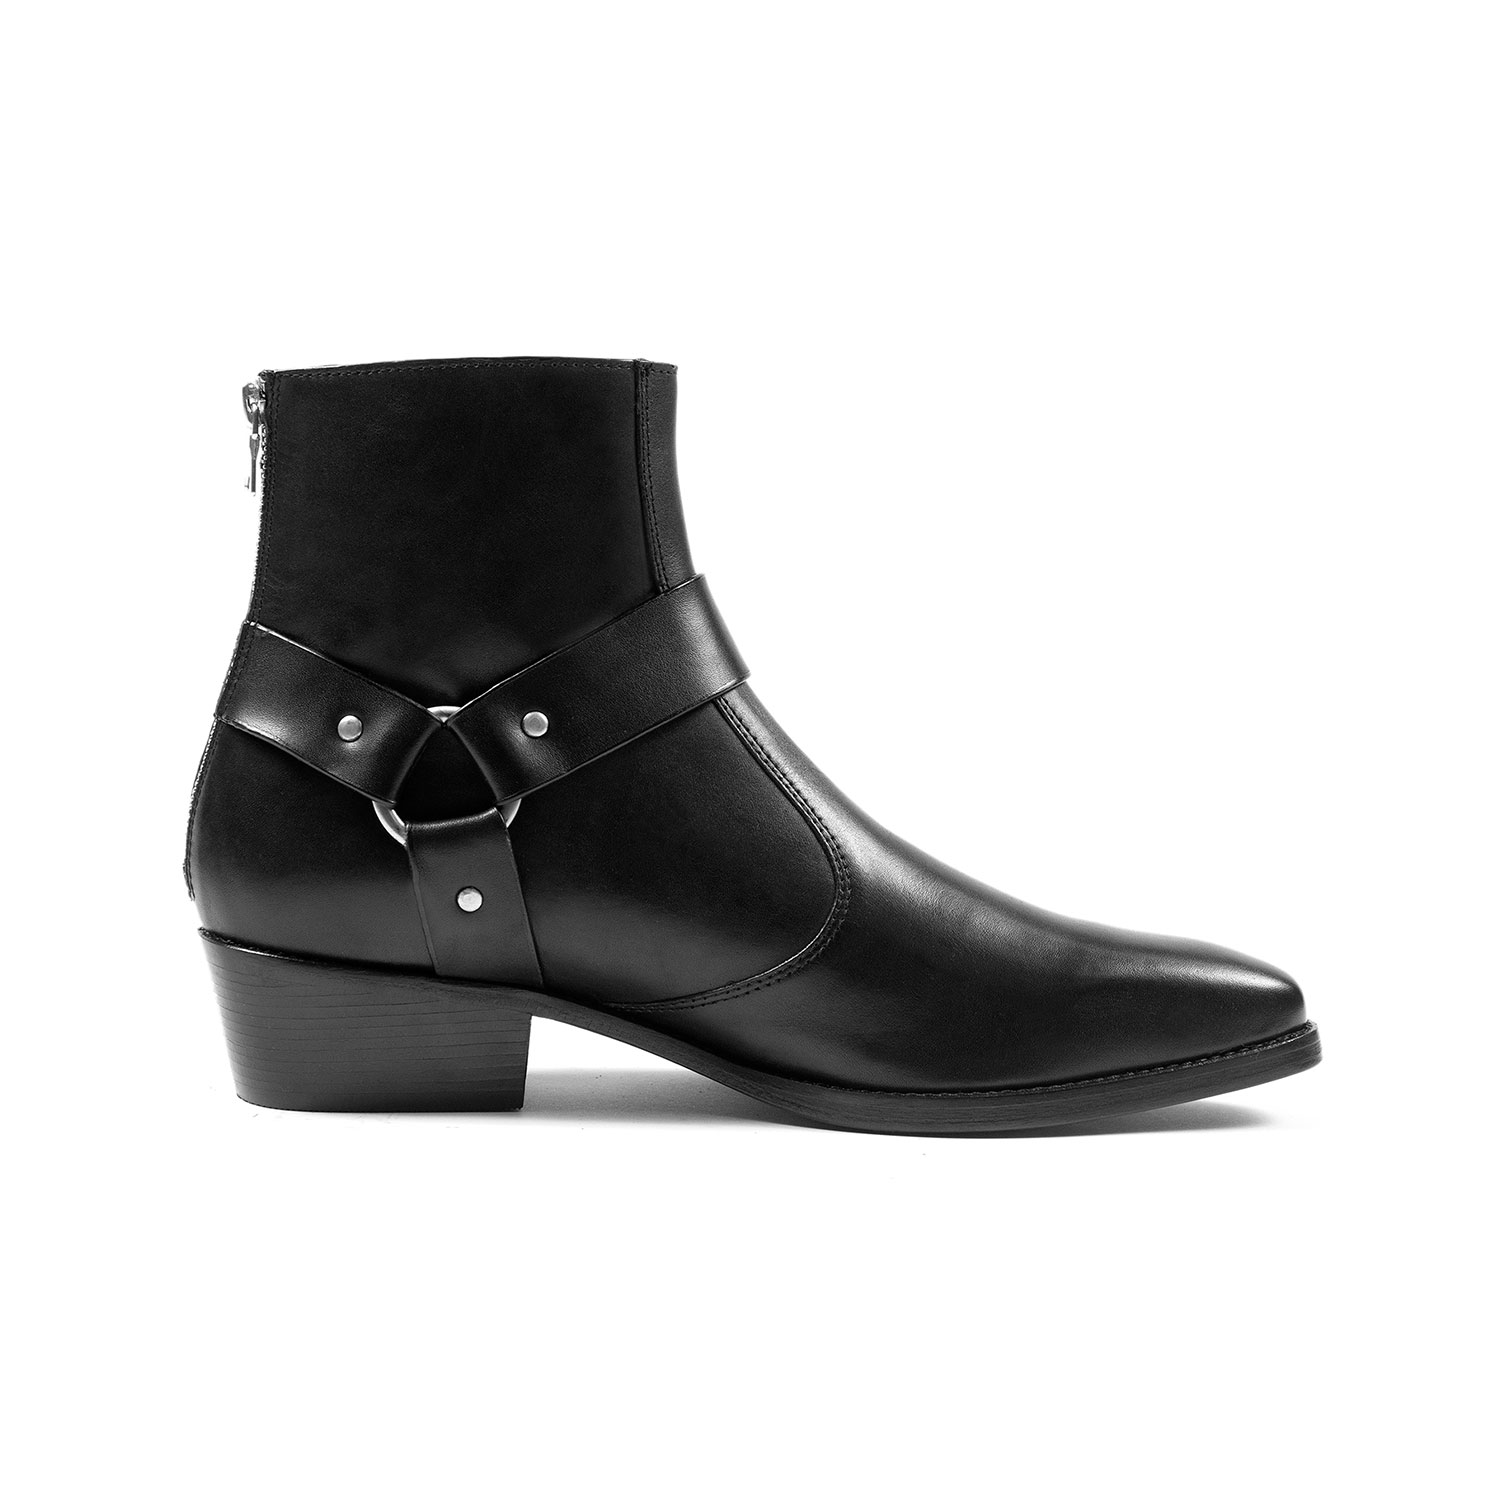 Libertine - Black and Nickel Leather Harness Boots | Straight To Hell ...